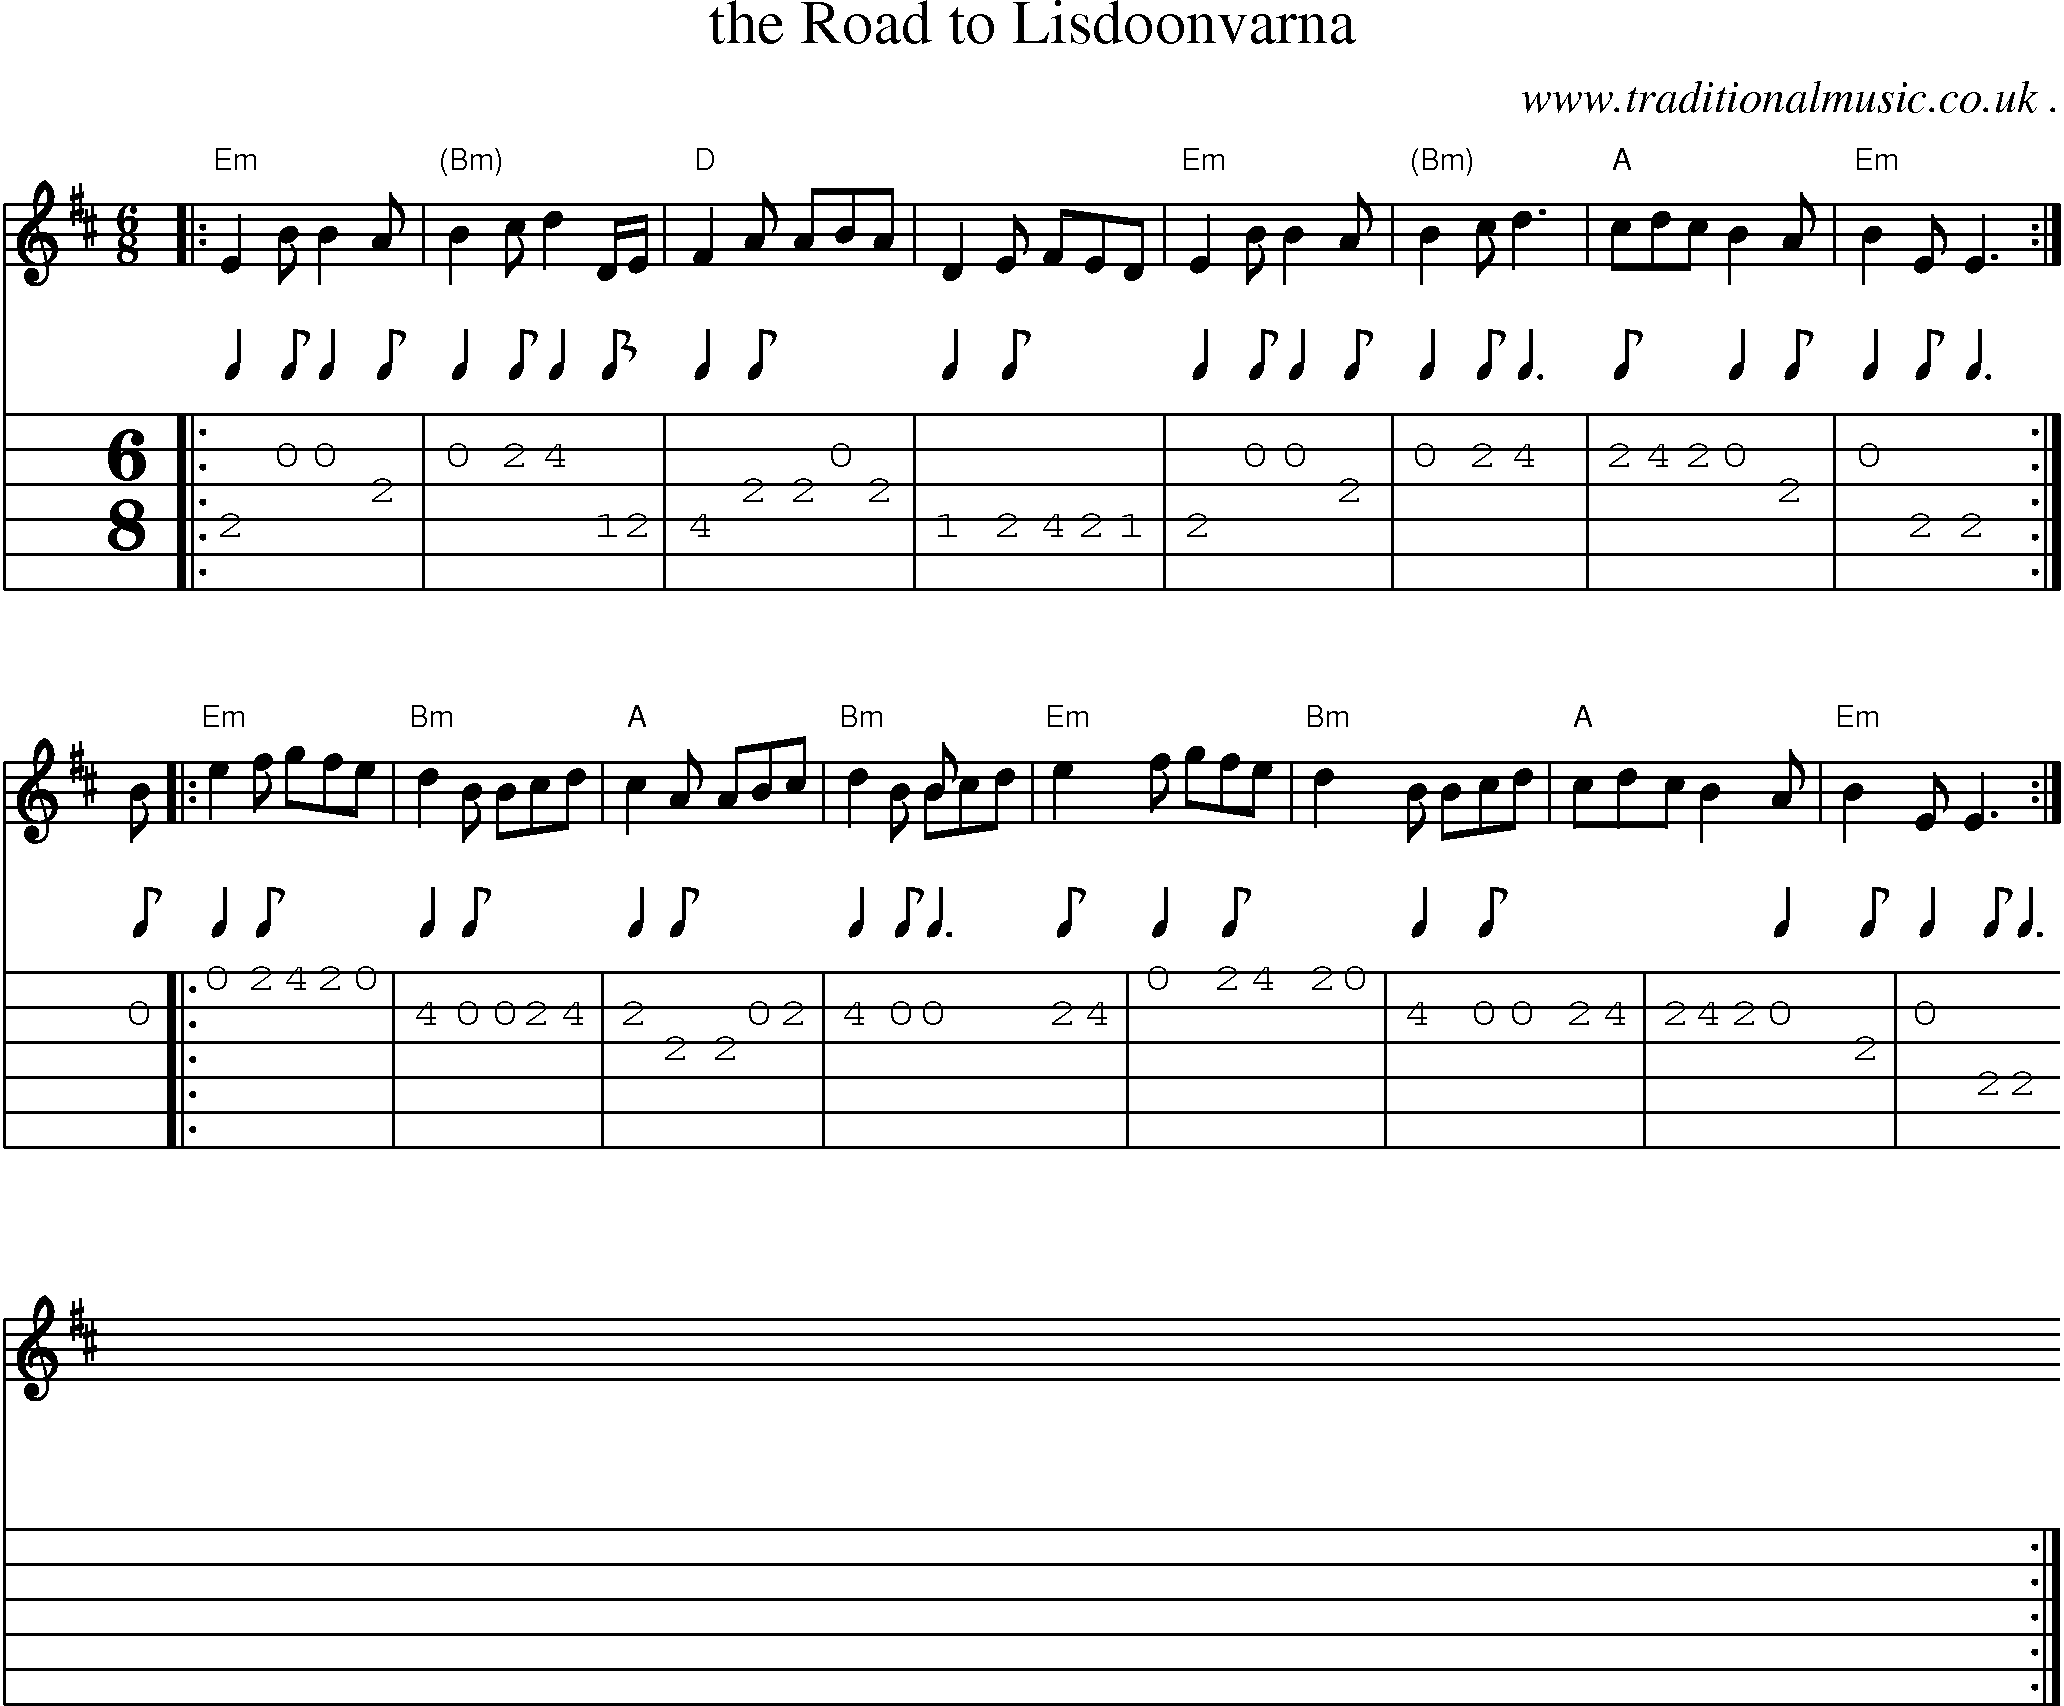 Sheet-music  score, Chords and Guitar Tabs for The Road To Lisdoonvarna